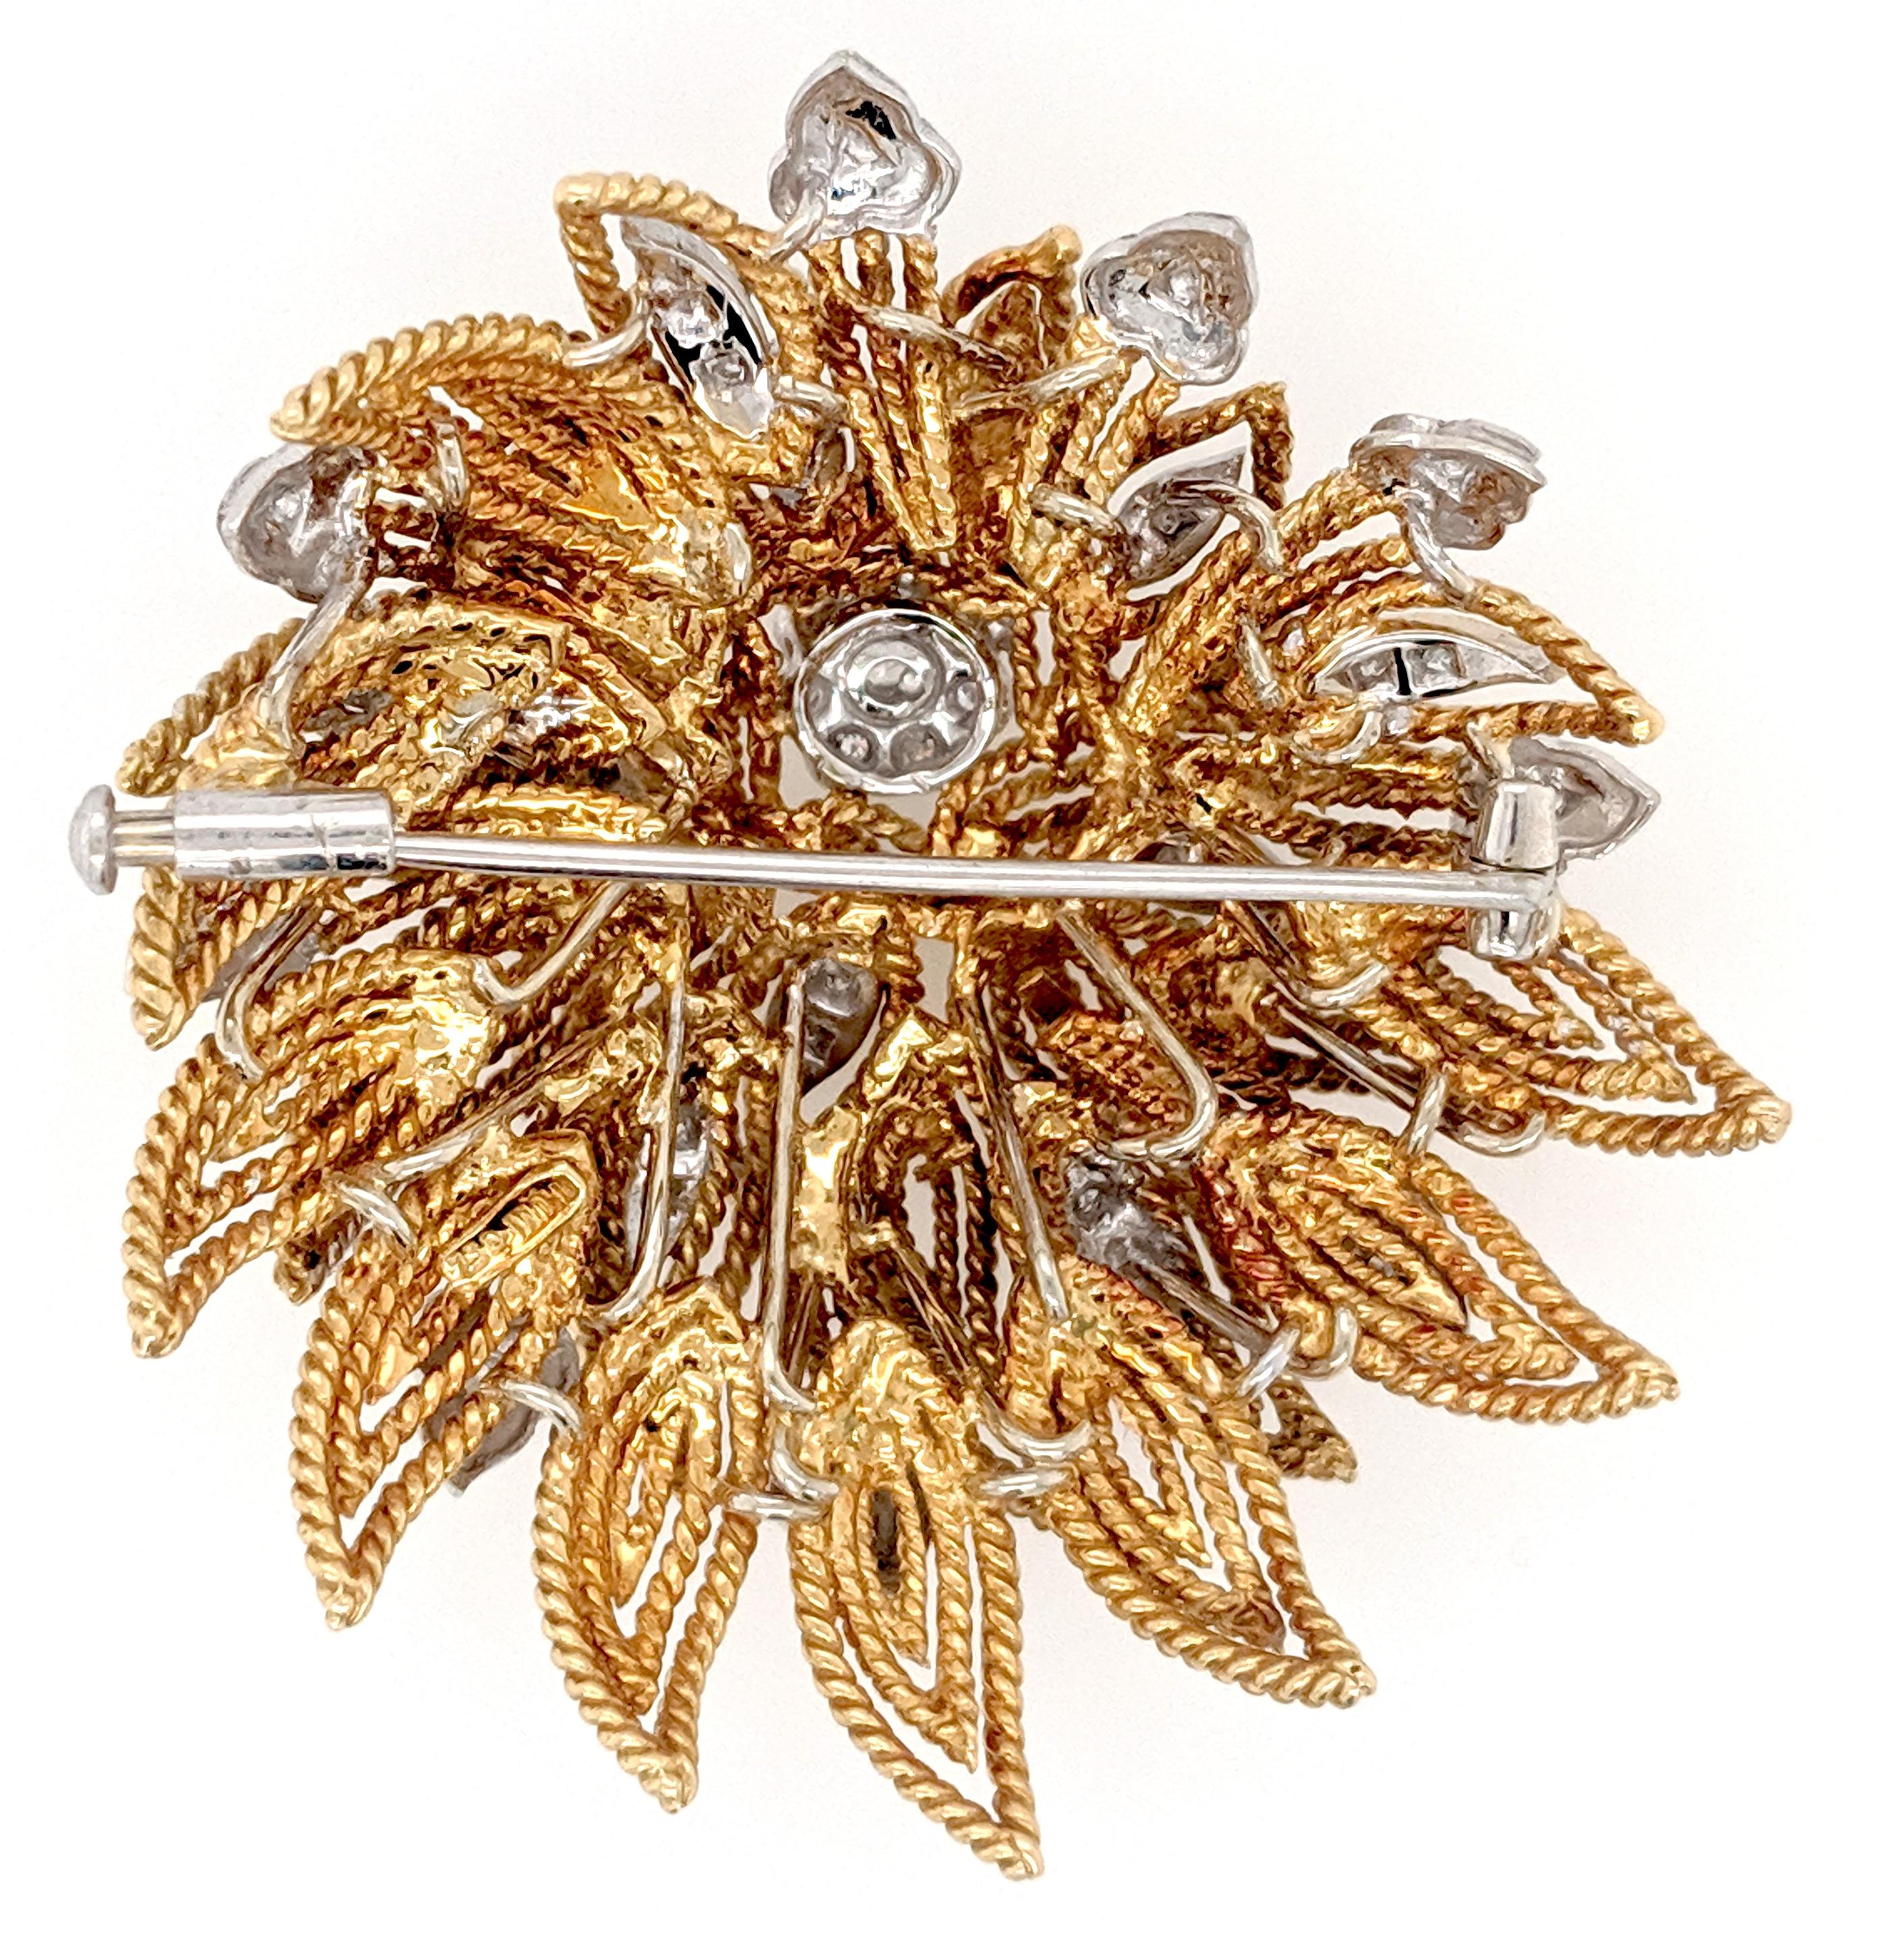 A diamond Flower Brooch crafted in 18k yellow gold featuring (38) round brilliant diamonds weighing approximately .50cttw with a color of G/H and a clarity of SI1 to SI2

The brooch measures 2